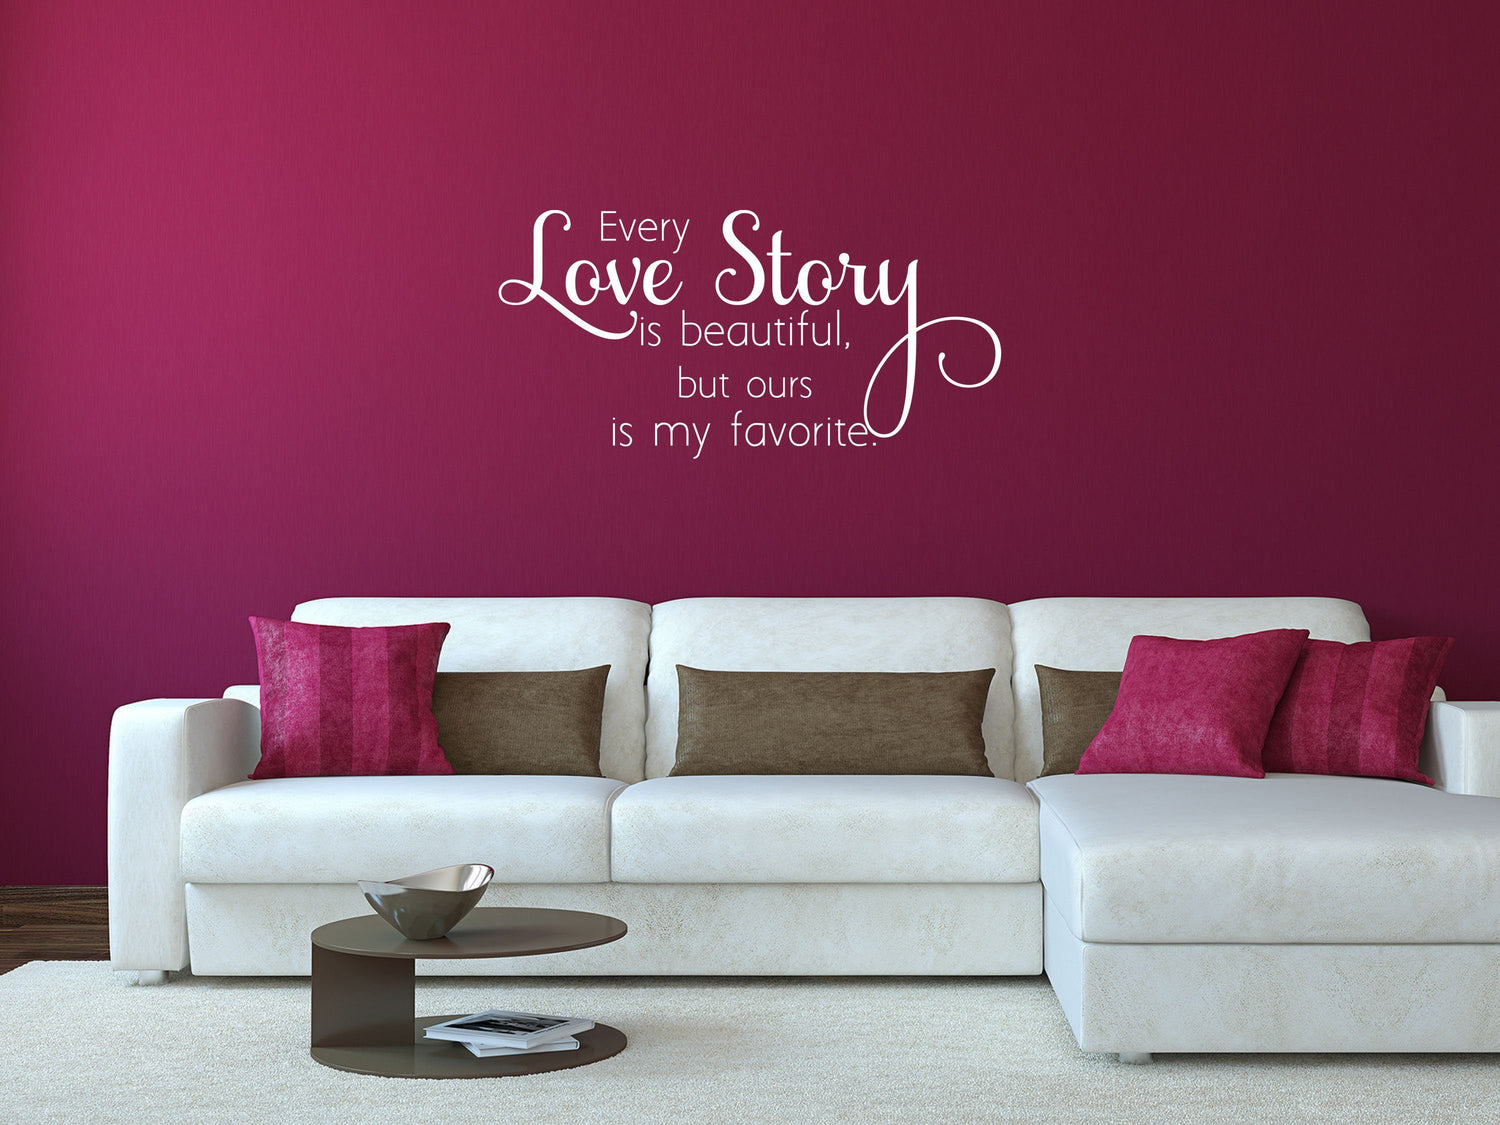 Every Love Story - Inspirational Wall Decals Vinyl Wall Decal Done 